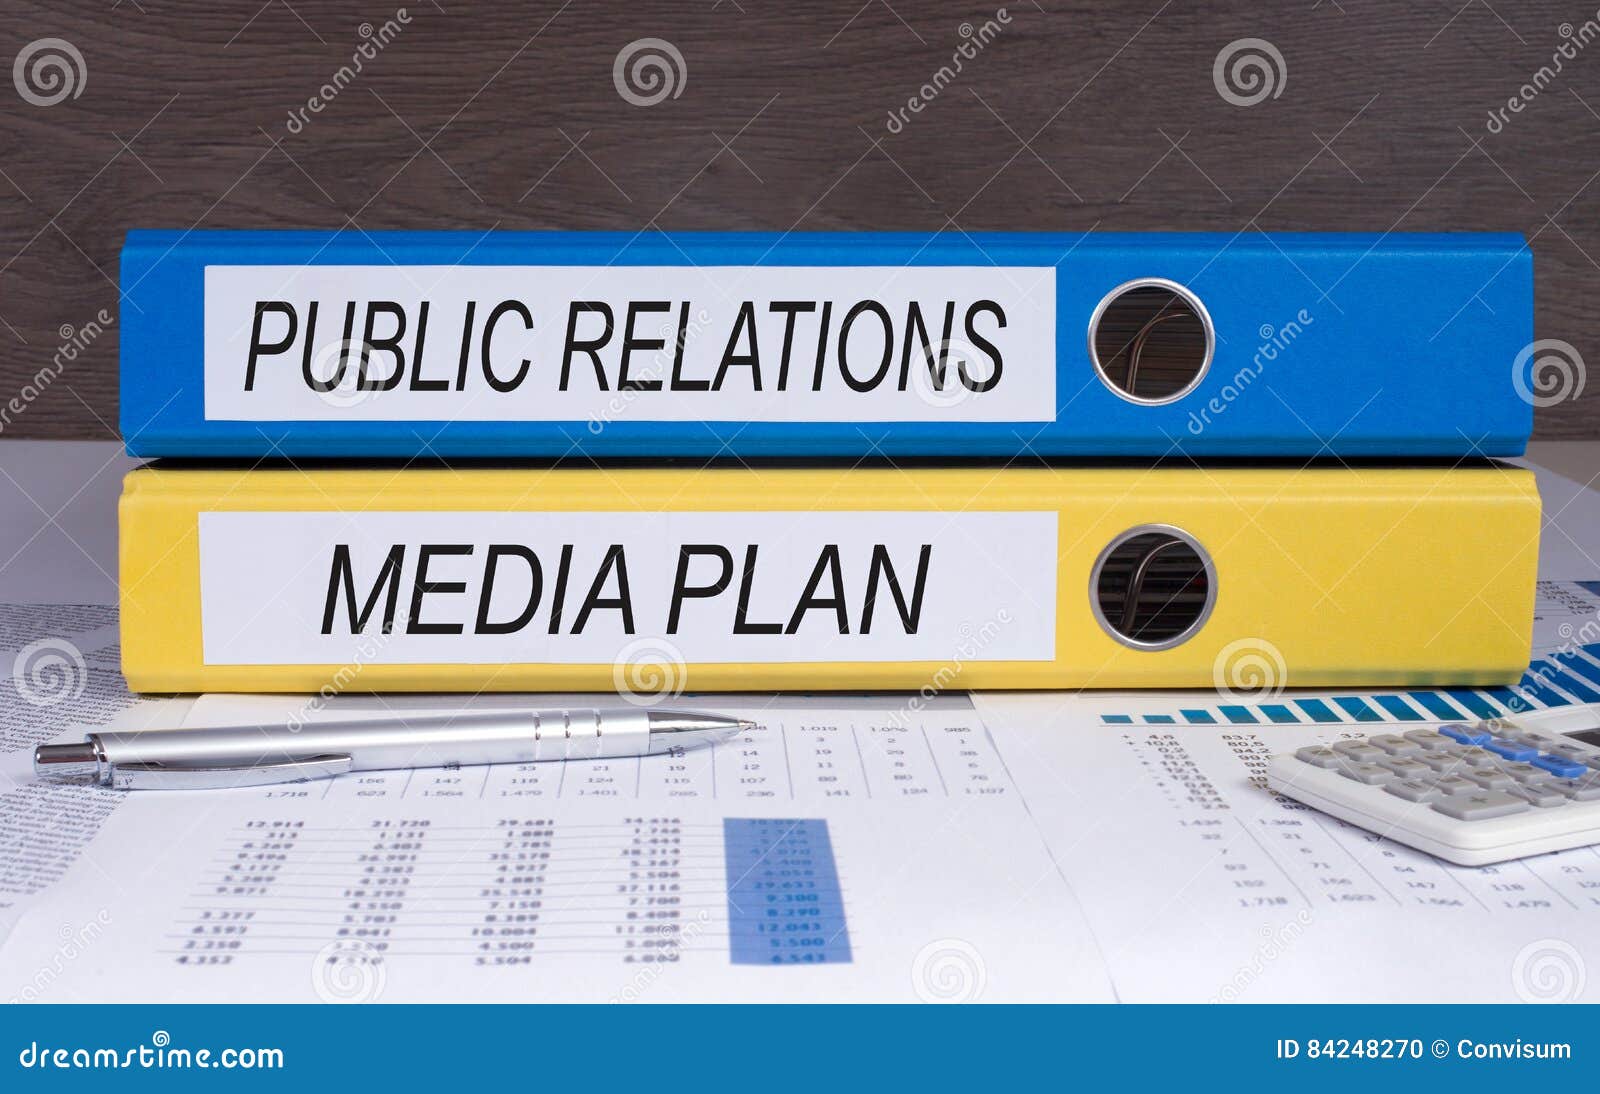 public relations and media plan